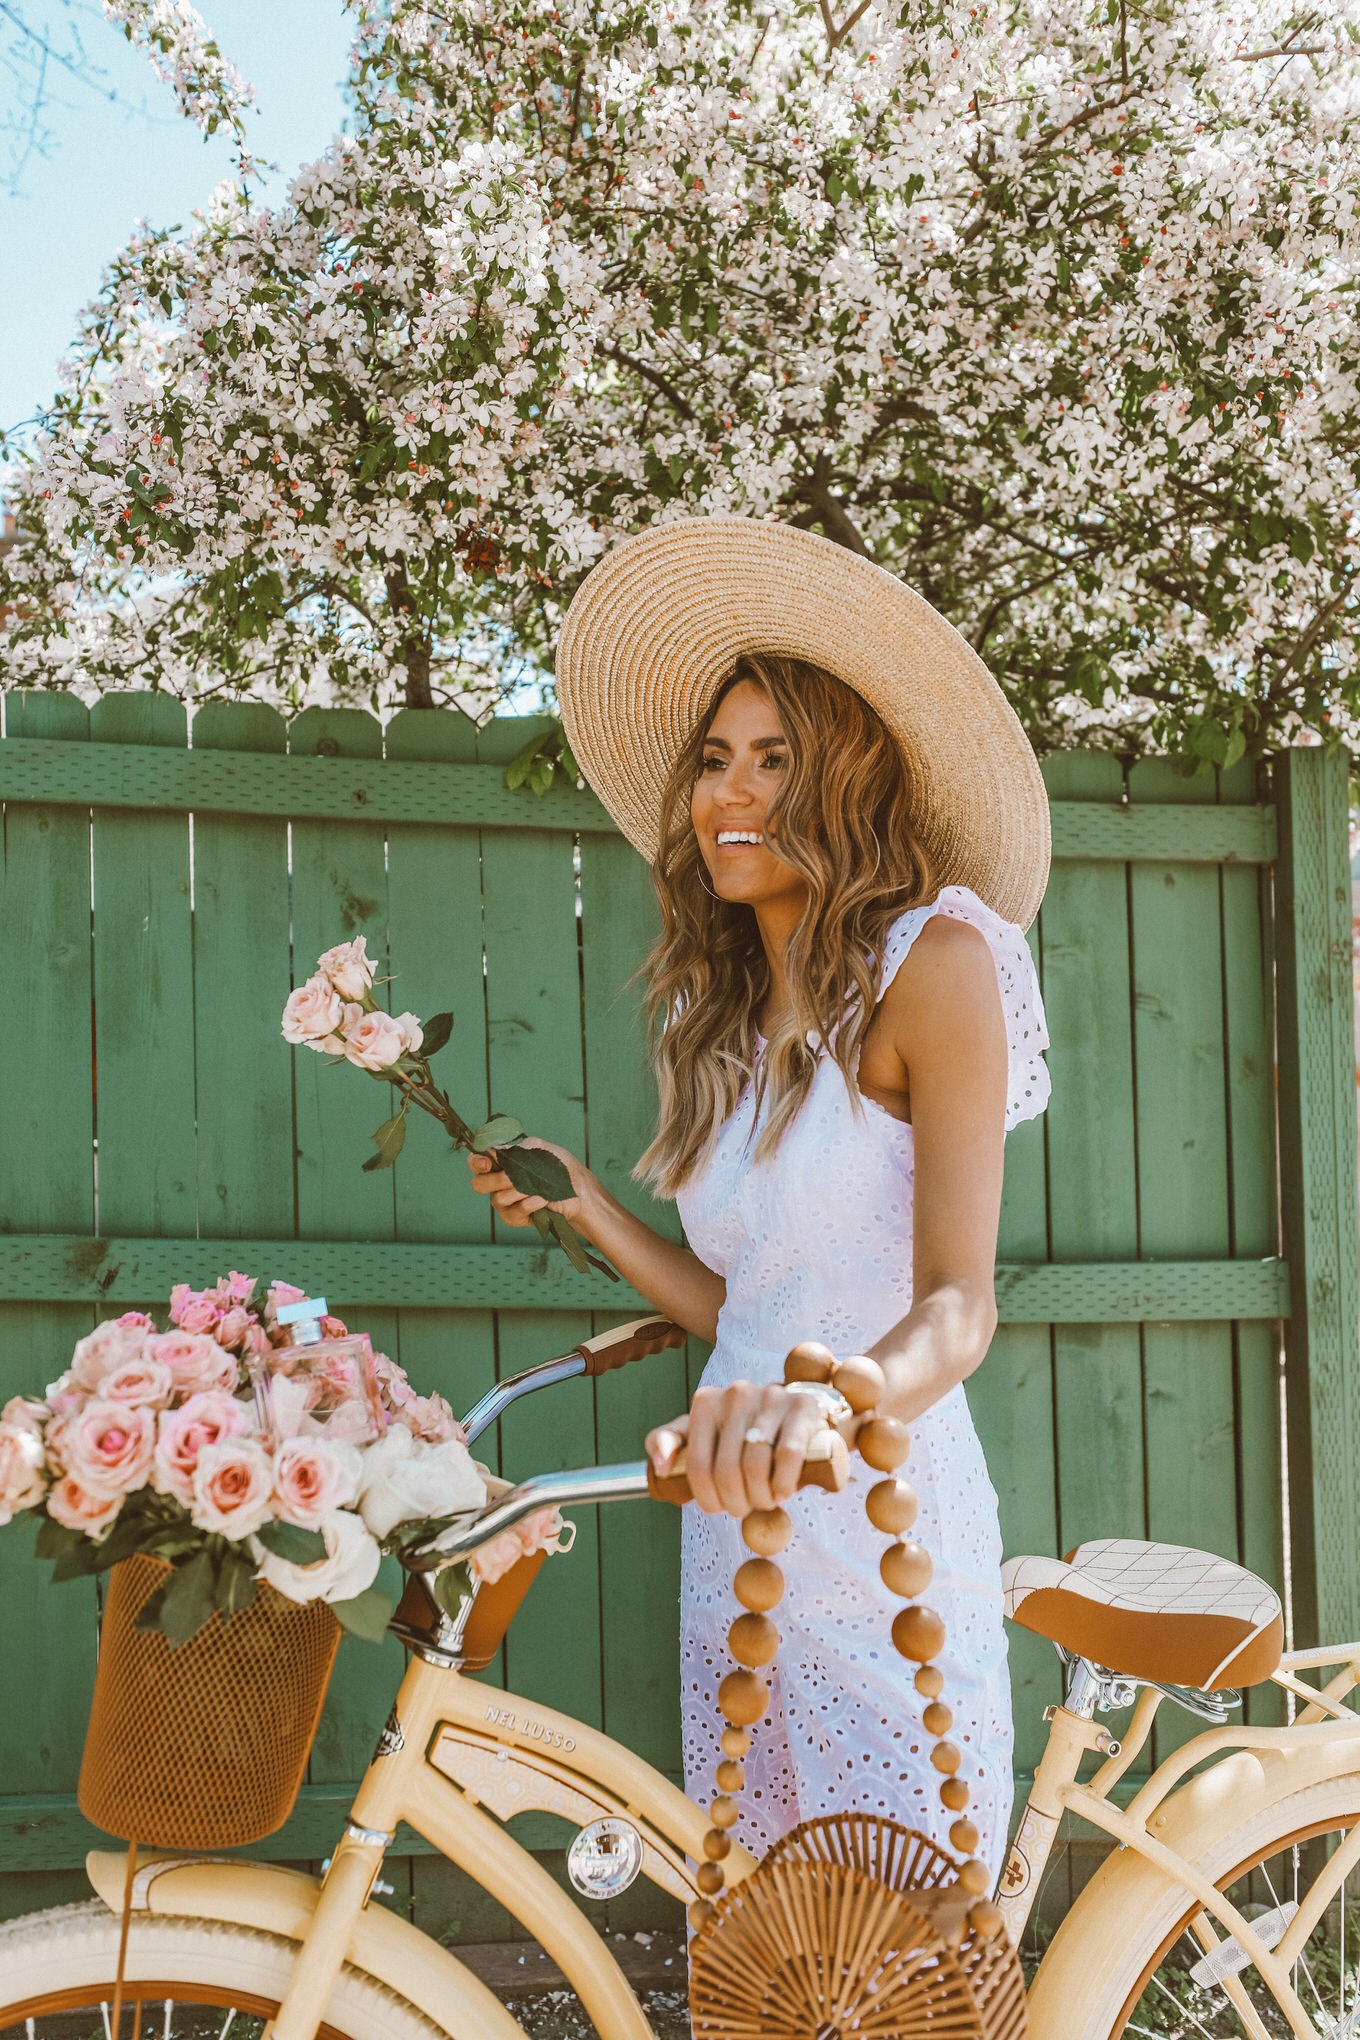 Flowers and bikes